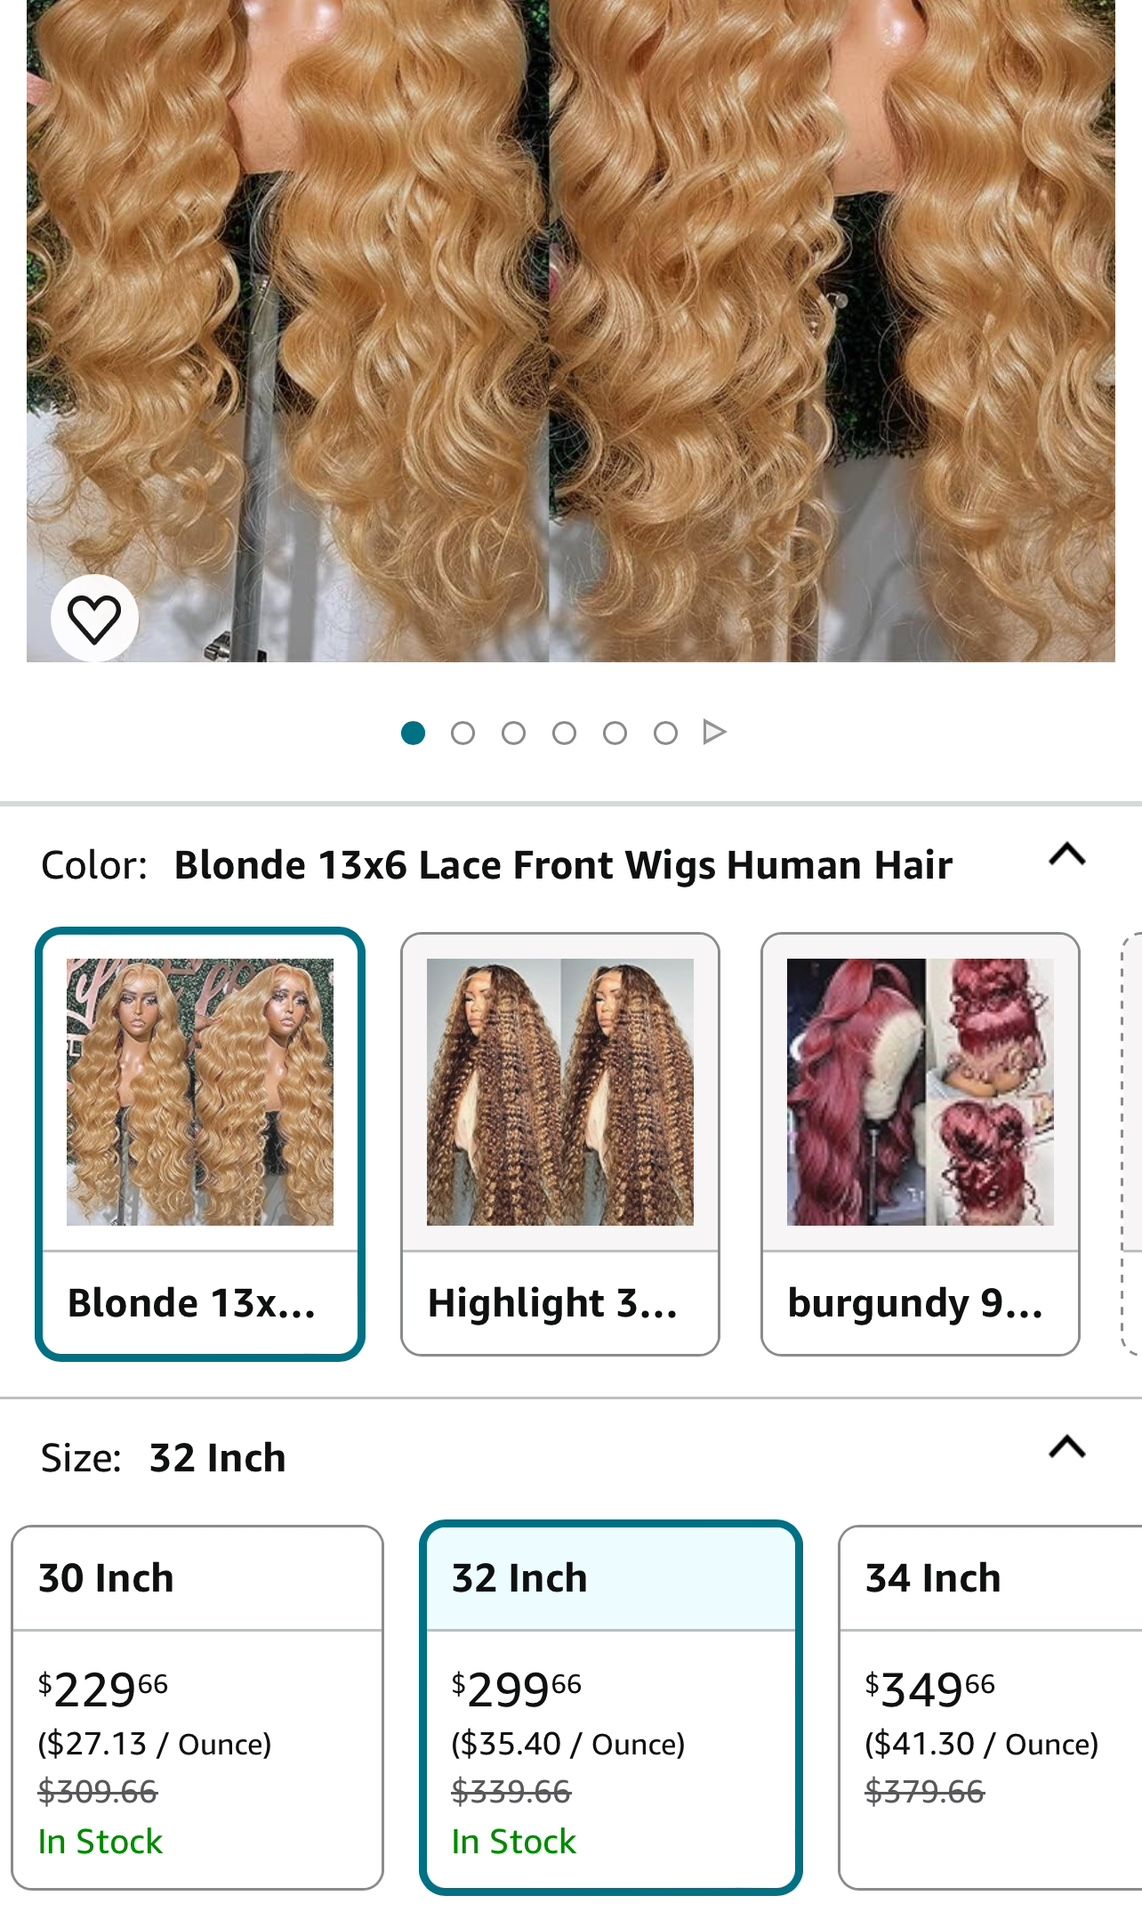 Blonde 32” Lace Wig